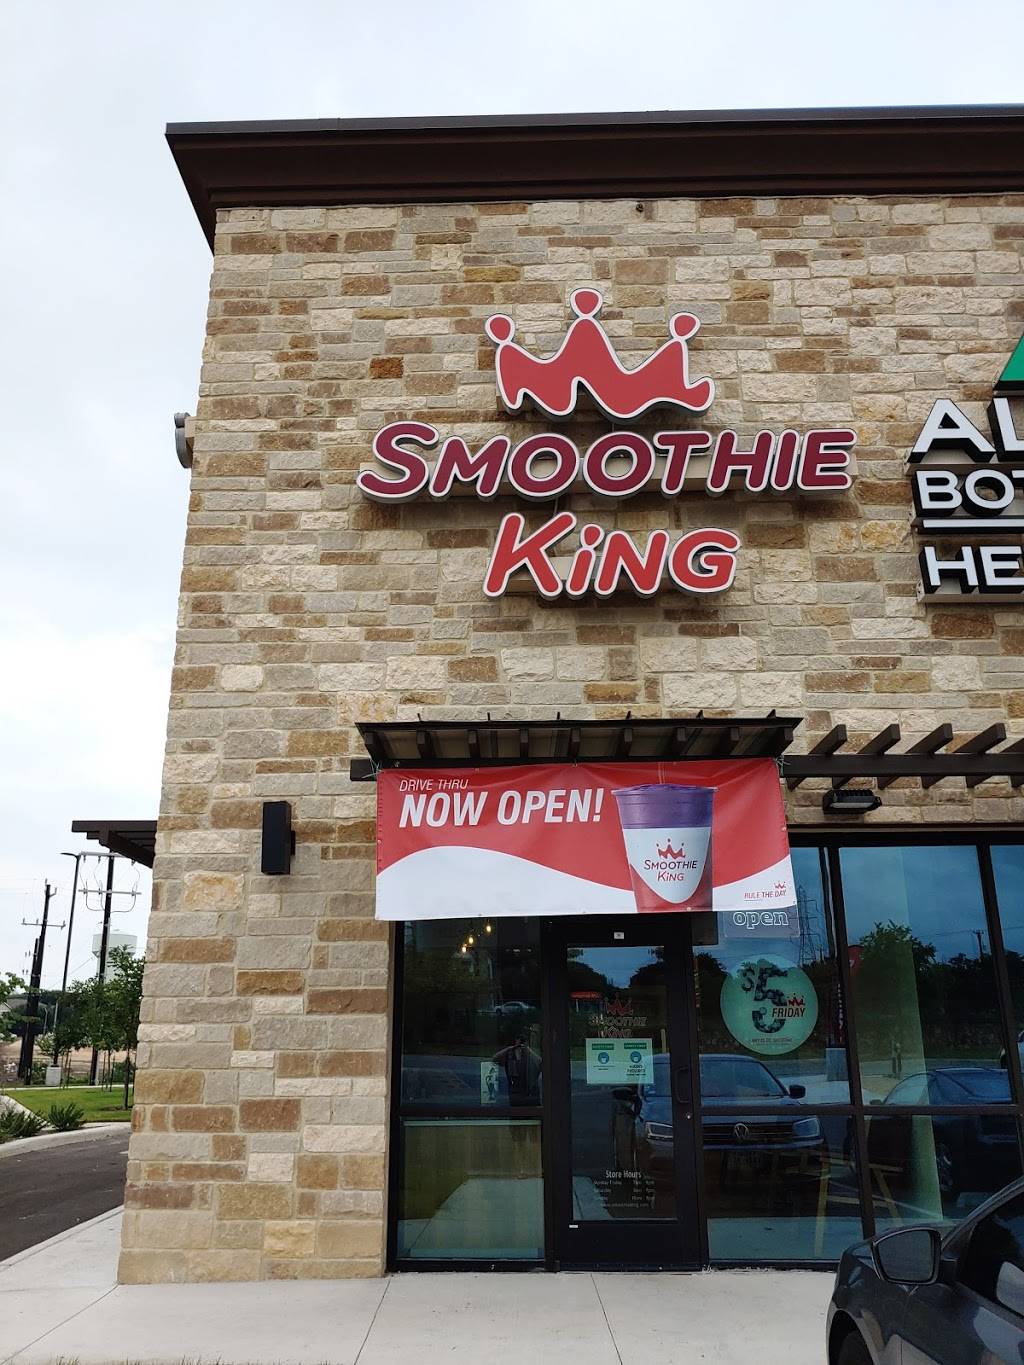 Smoothie King | meal delivery | 10222 Huebner Rd Ste 116, San Antonio, TX 78240, USA | 2104621322 OR +1 210-462-1322